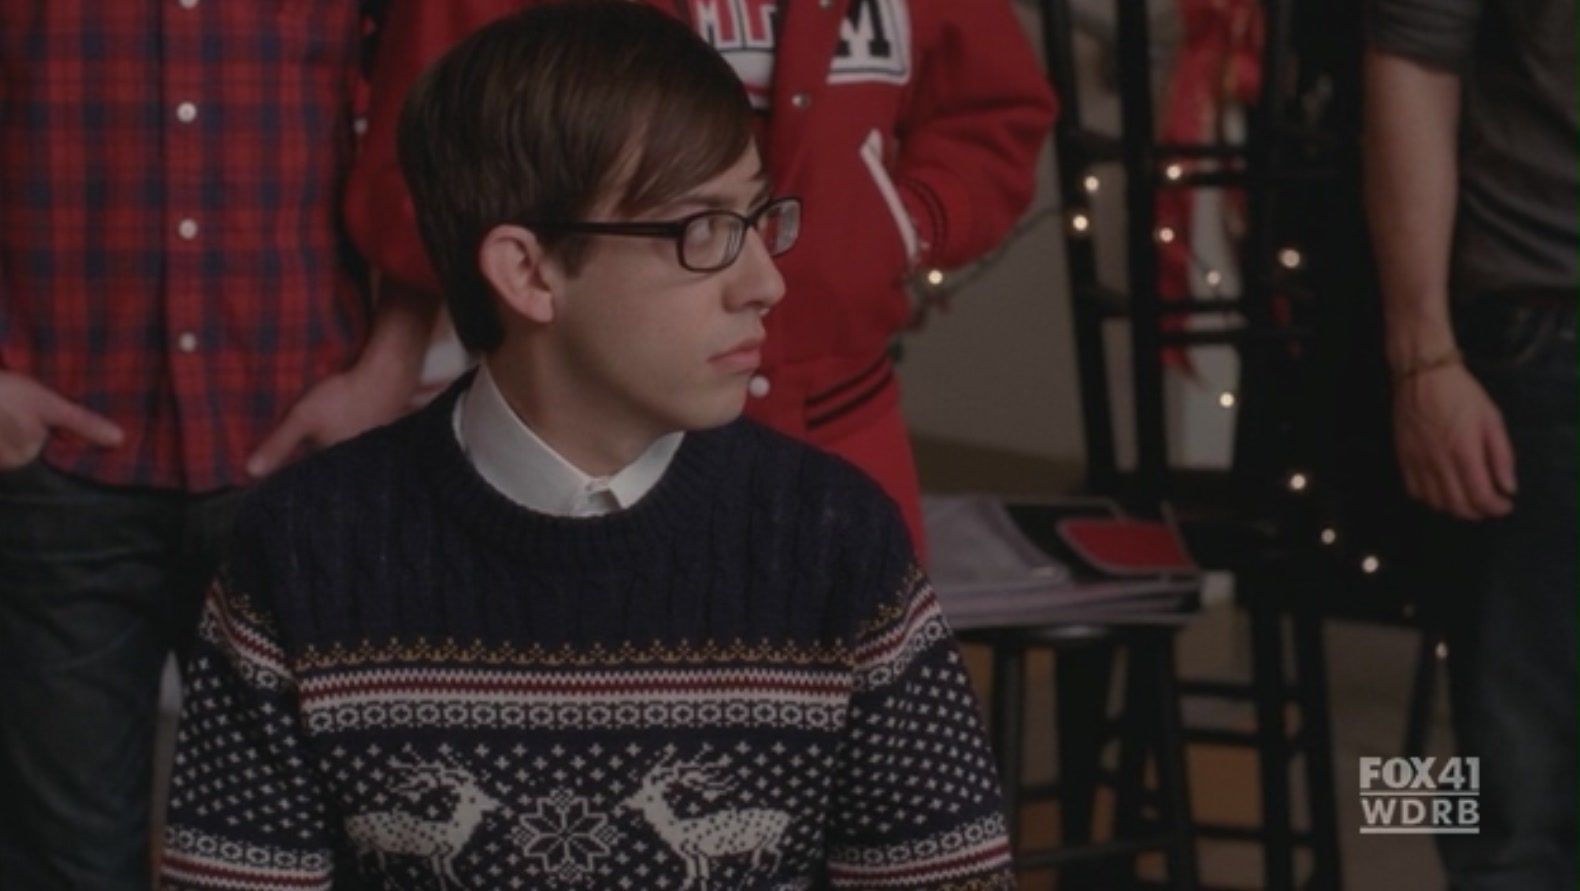 The Gay Guide to Glee: Season 2 Episode 10, “A Very Glee Christmas